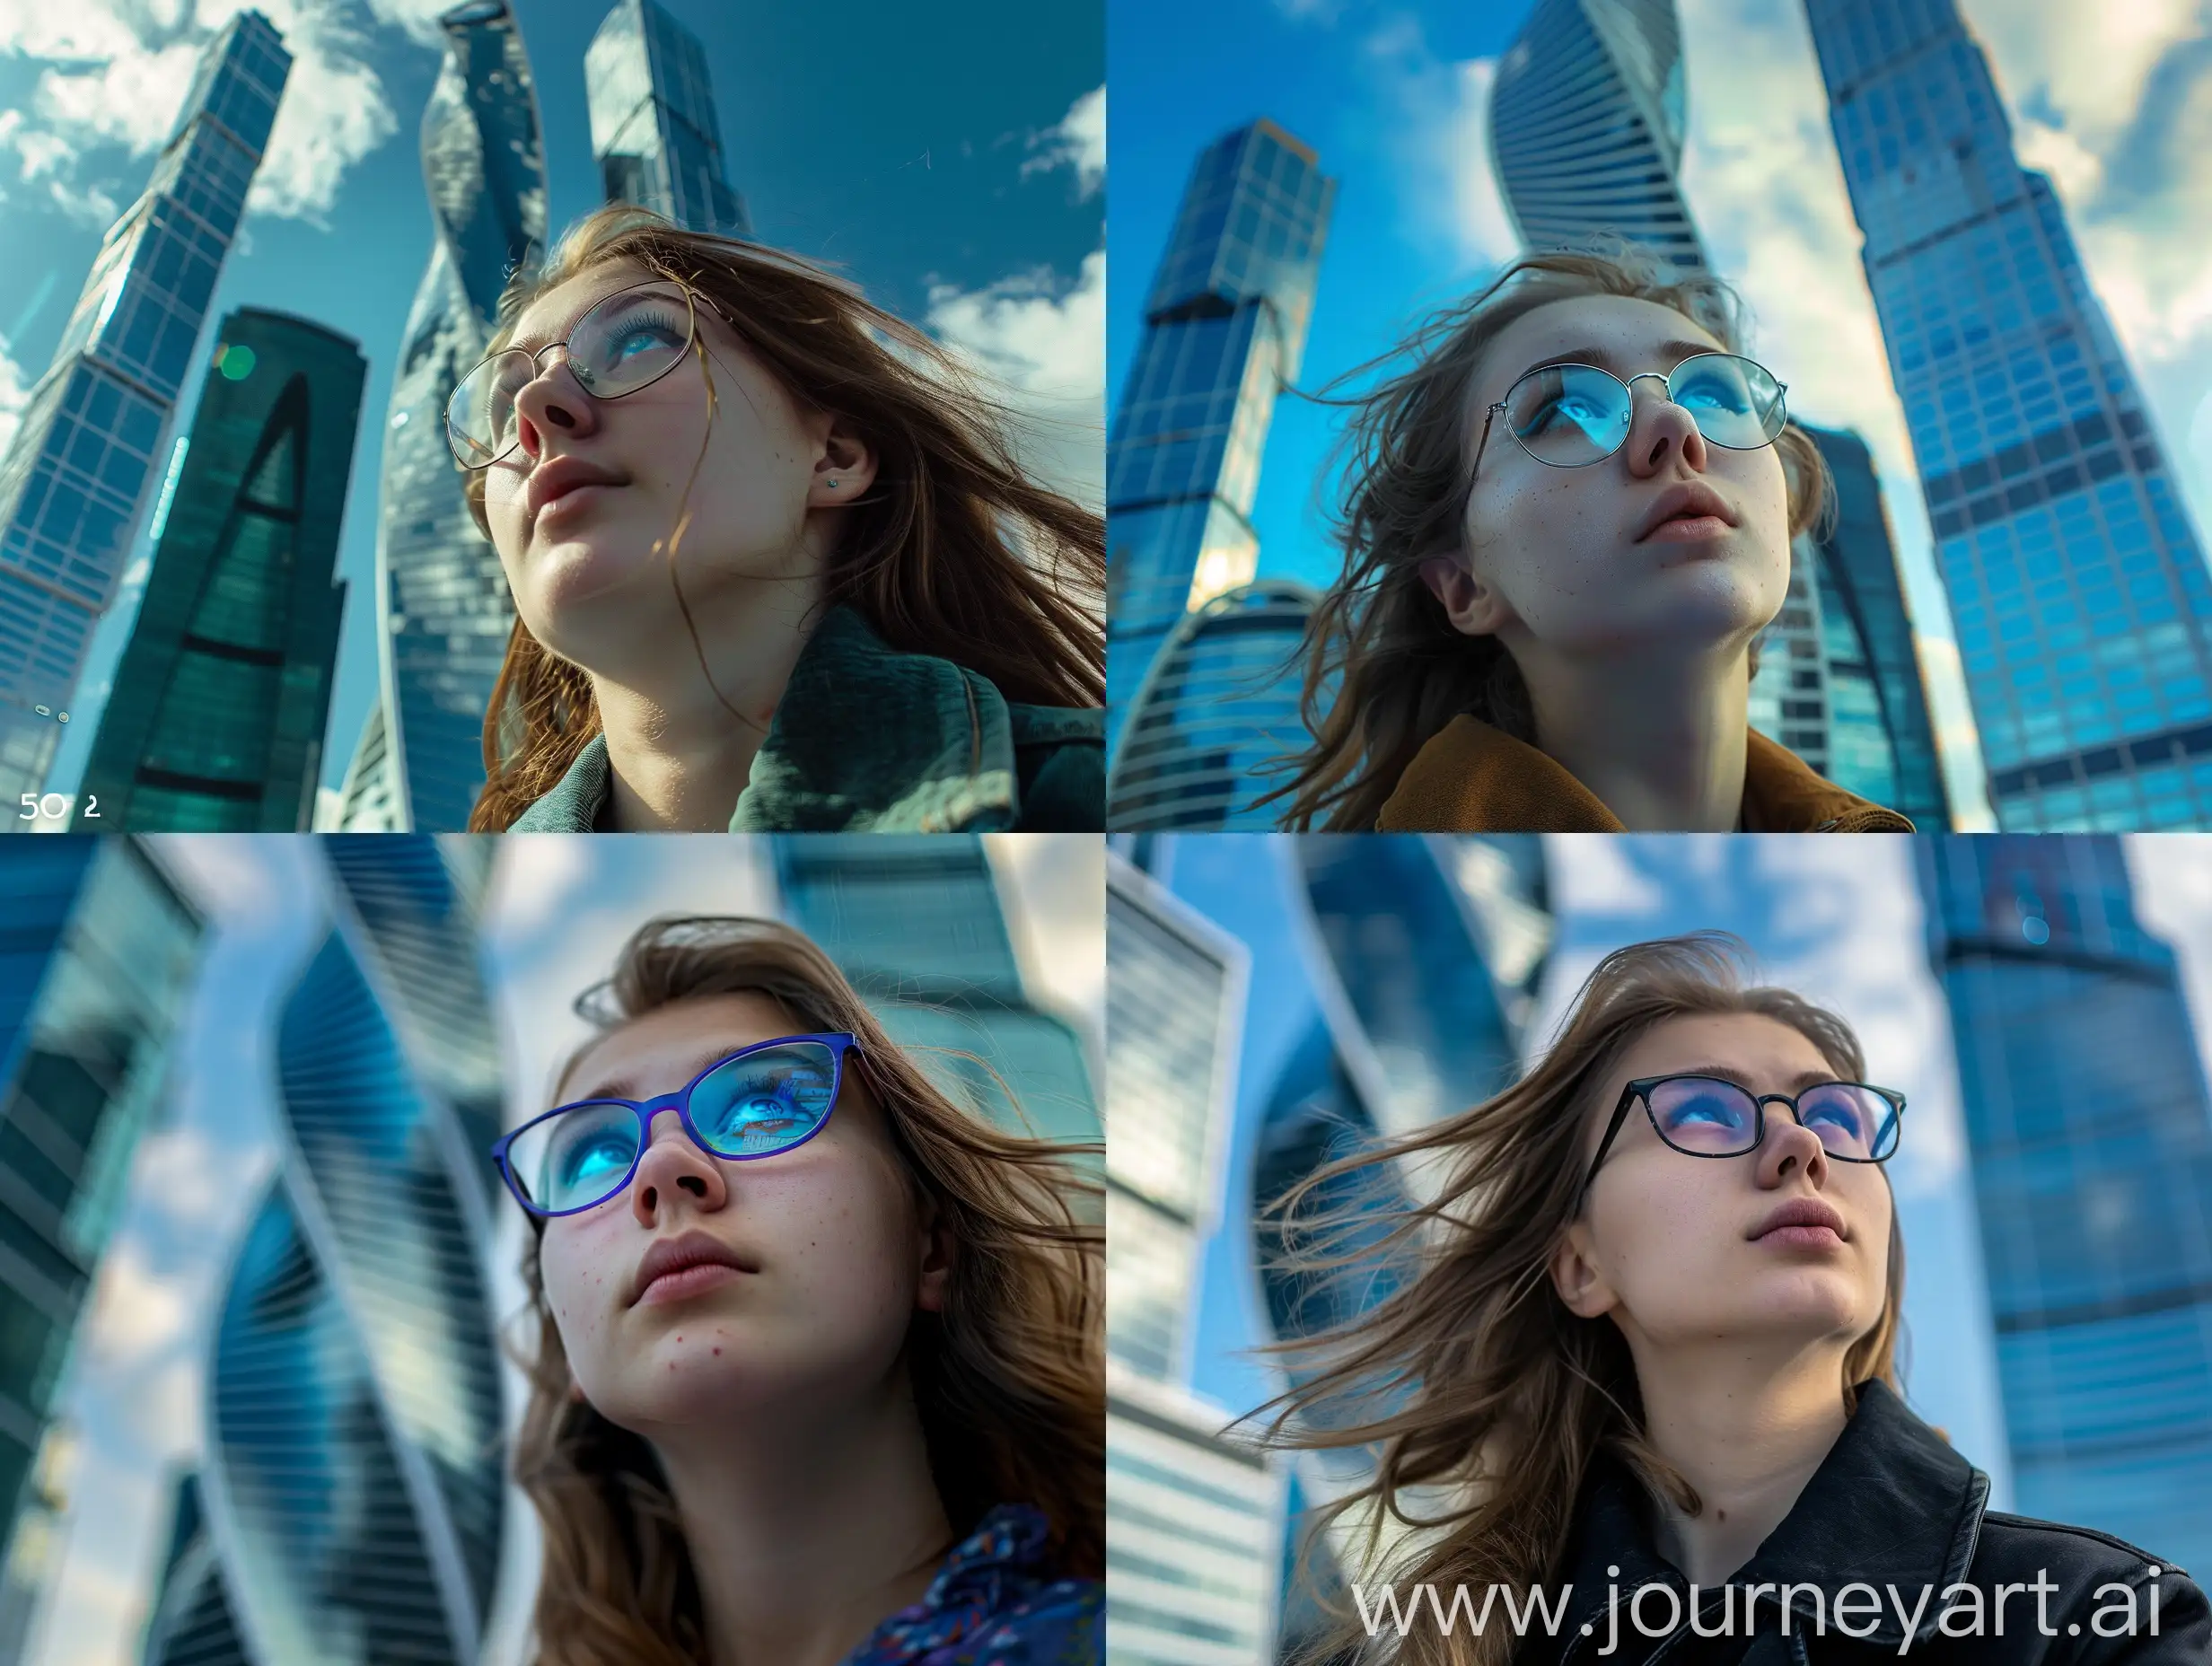 Stunning-Teenage-Girl-with-Glasses-Amidst-Moscow-Skyscrapers-and-Vibrant-Blue-Sky